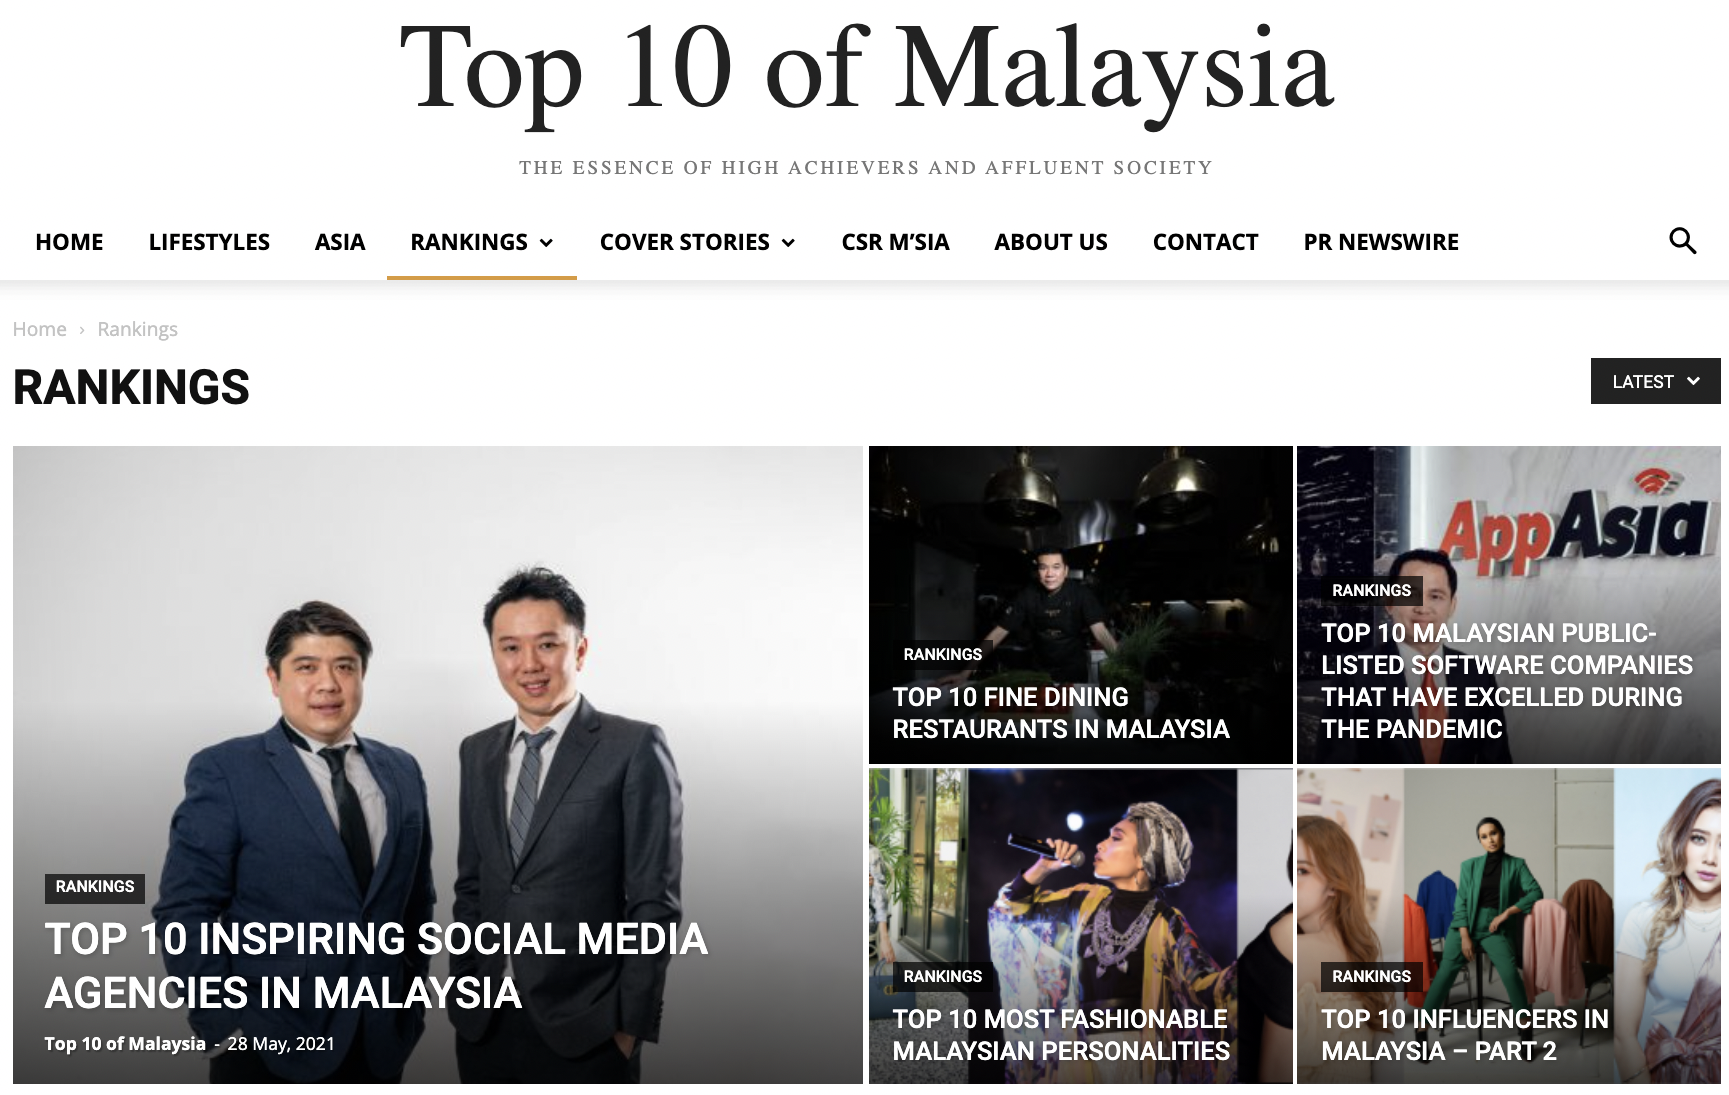 Top 10 of Malaysia - Social Grooves as Top 10 Digital Marketing Agency in Malaysia